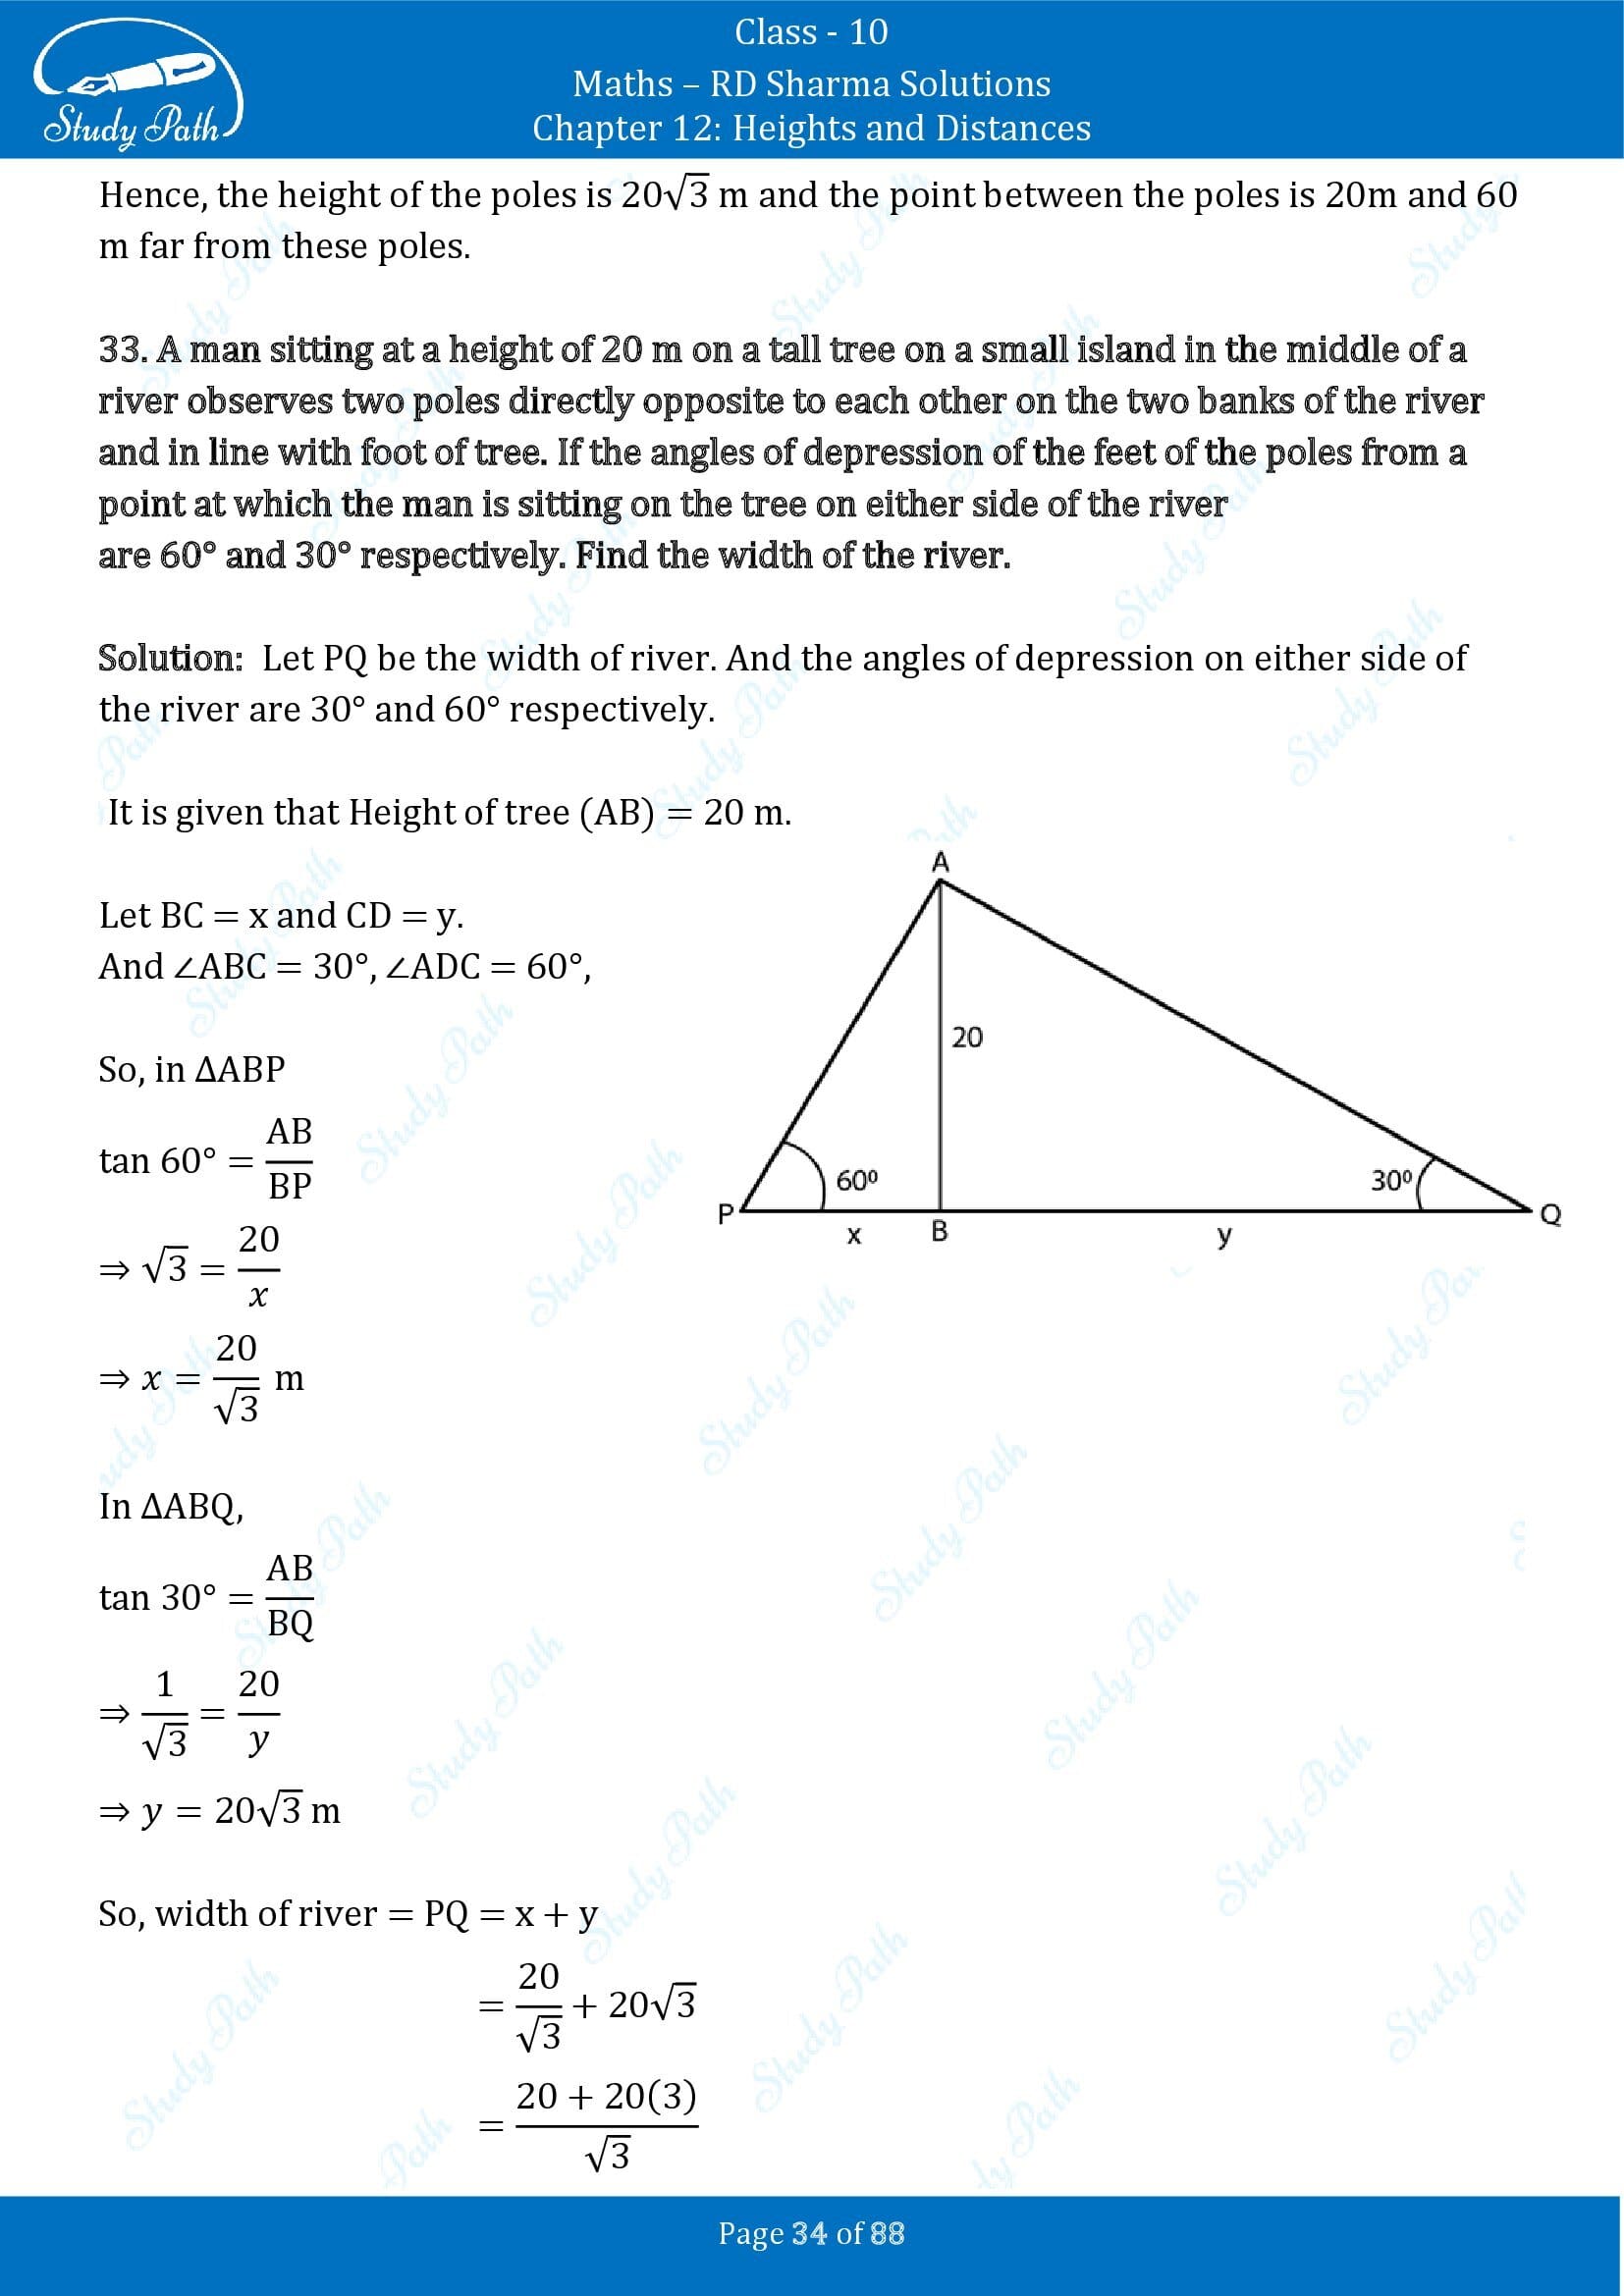 RD Sharma Solutions Class 10 Chapter 12 Heights and Distances Exercise 12.1 00034